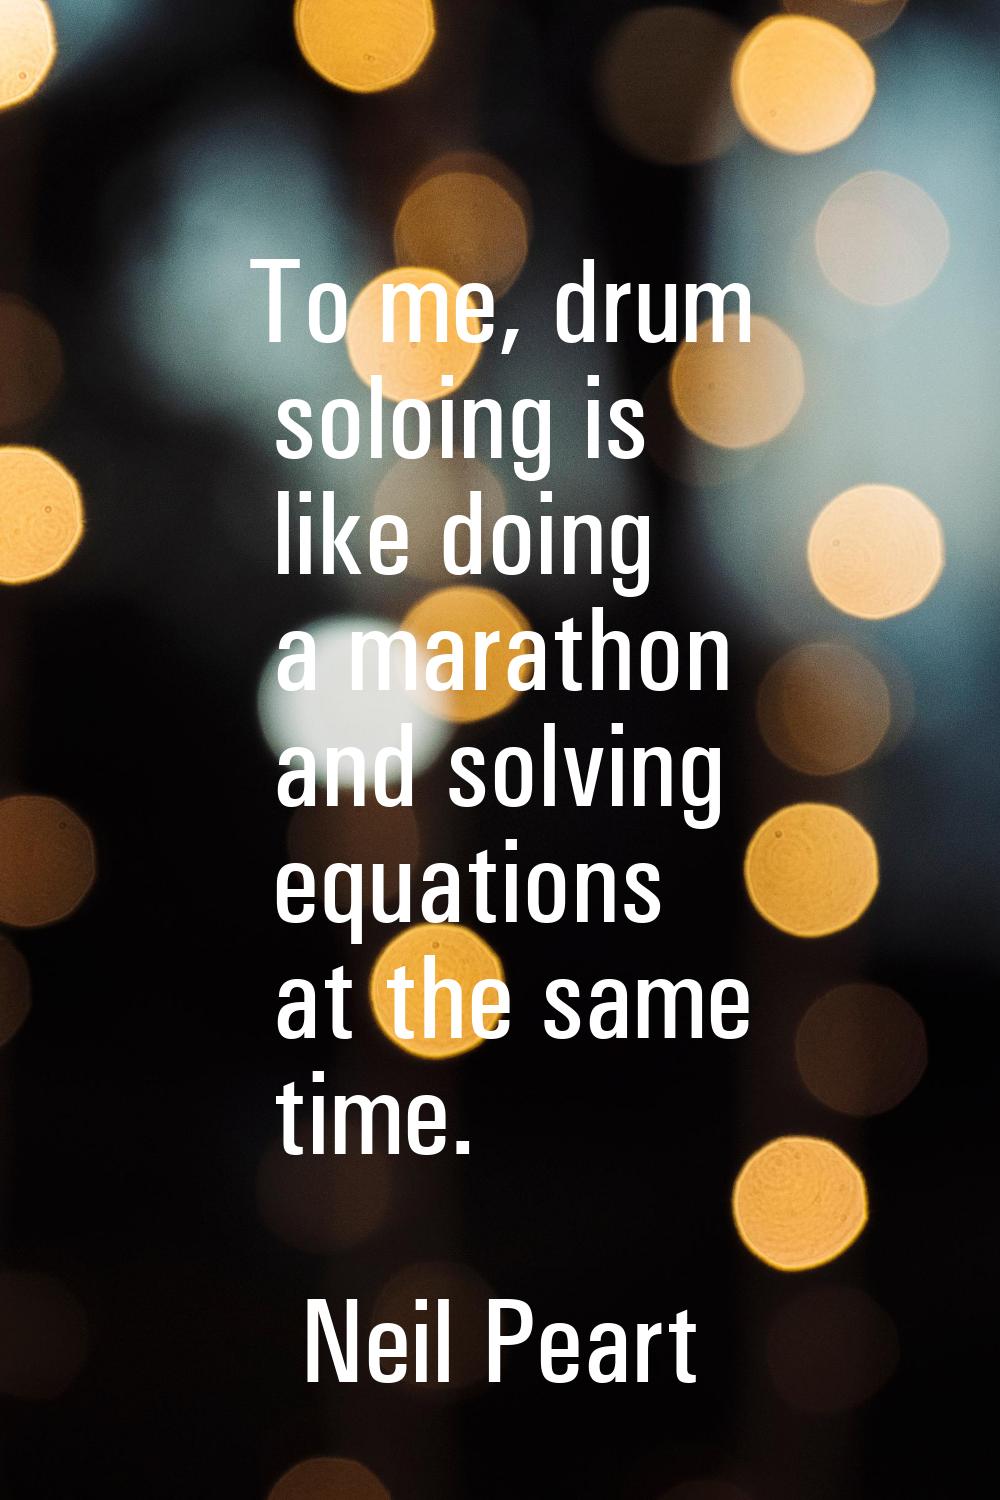 To me, drum soloing is like doing a marathon and solving equations at the same time.